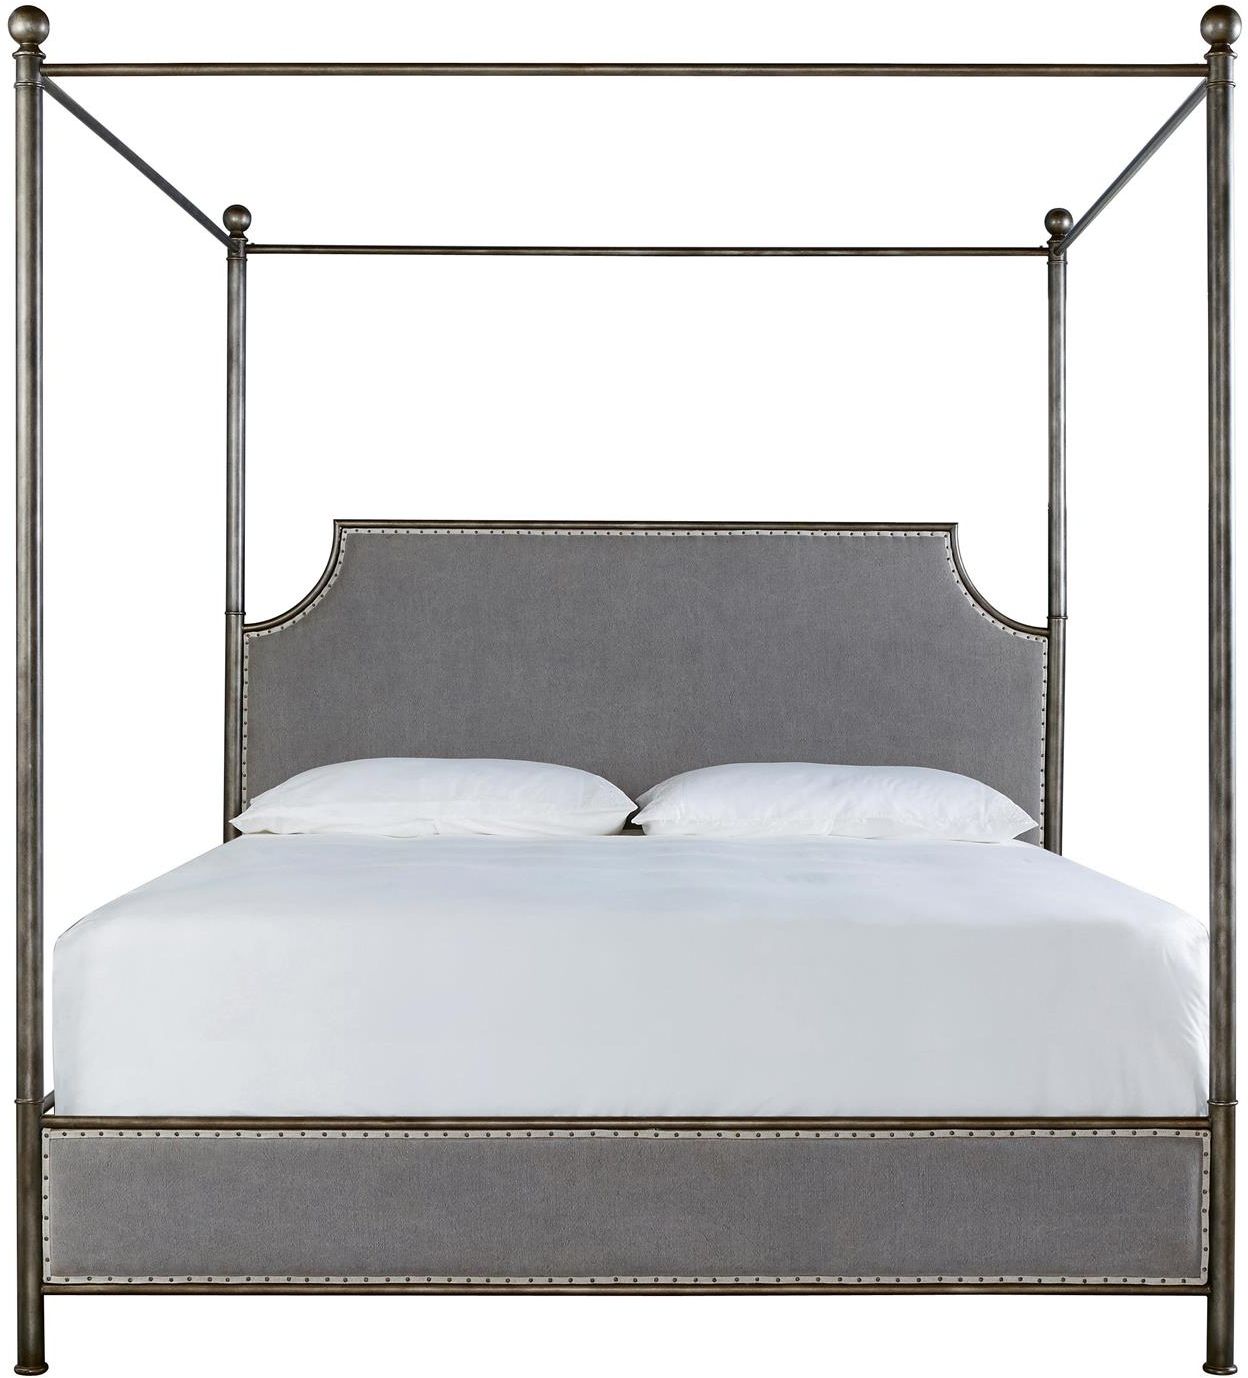 Universal Explore Home™ Soujourn Morning Mist Respite Queen Bed